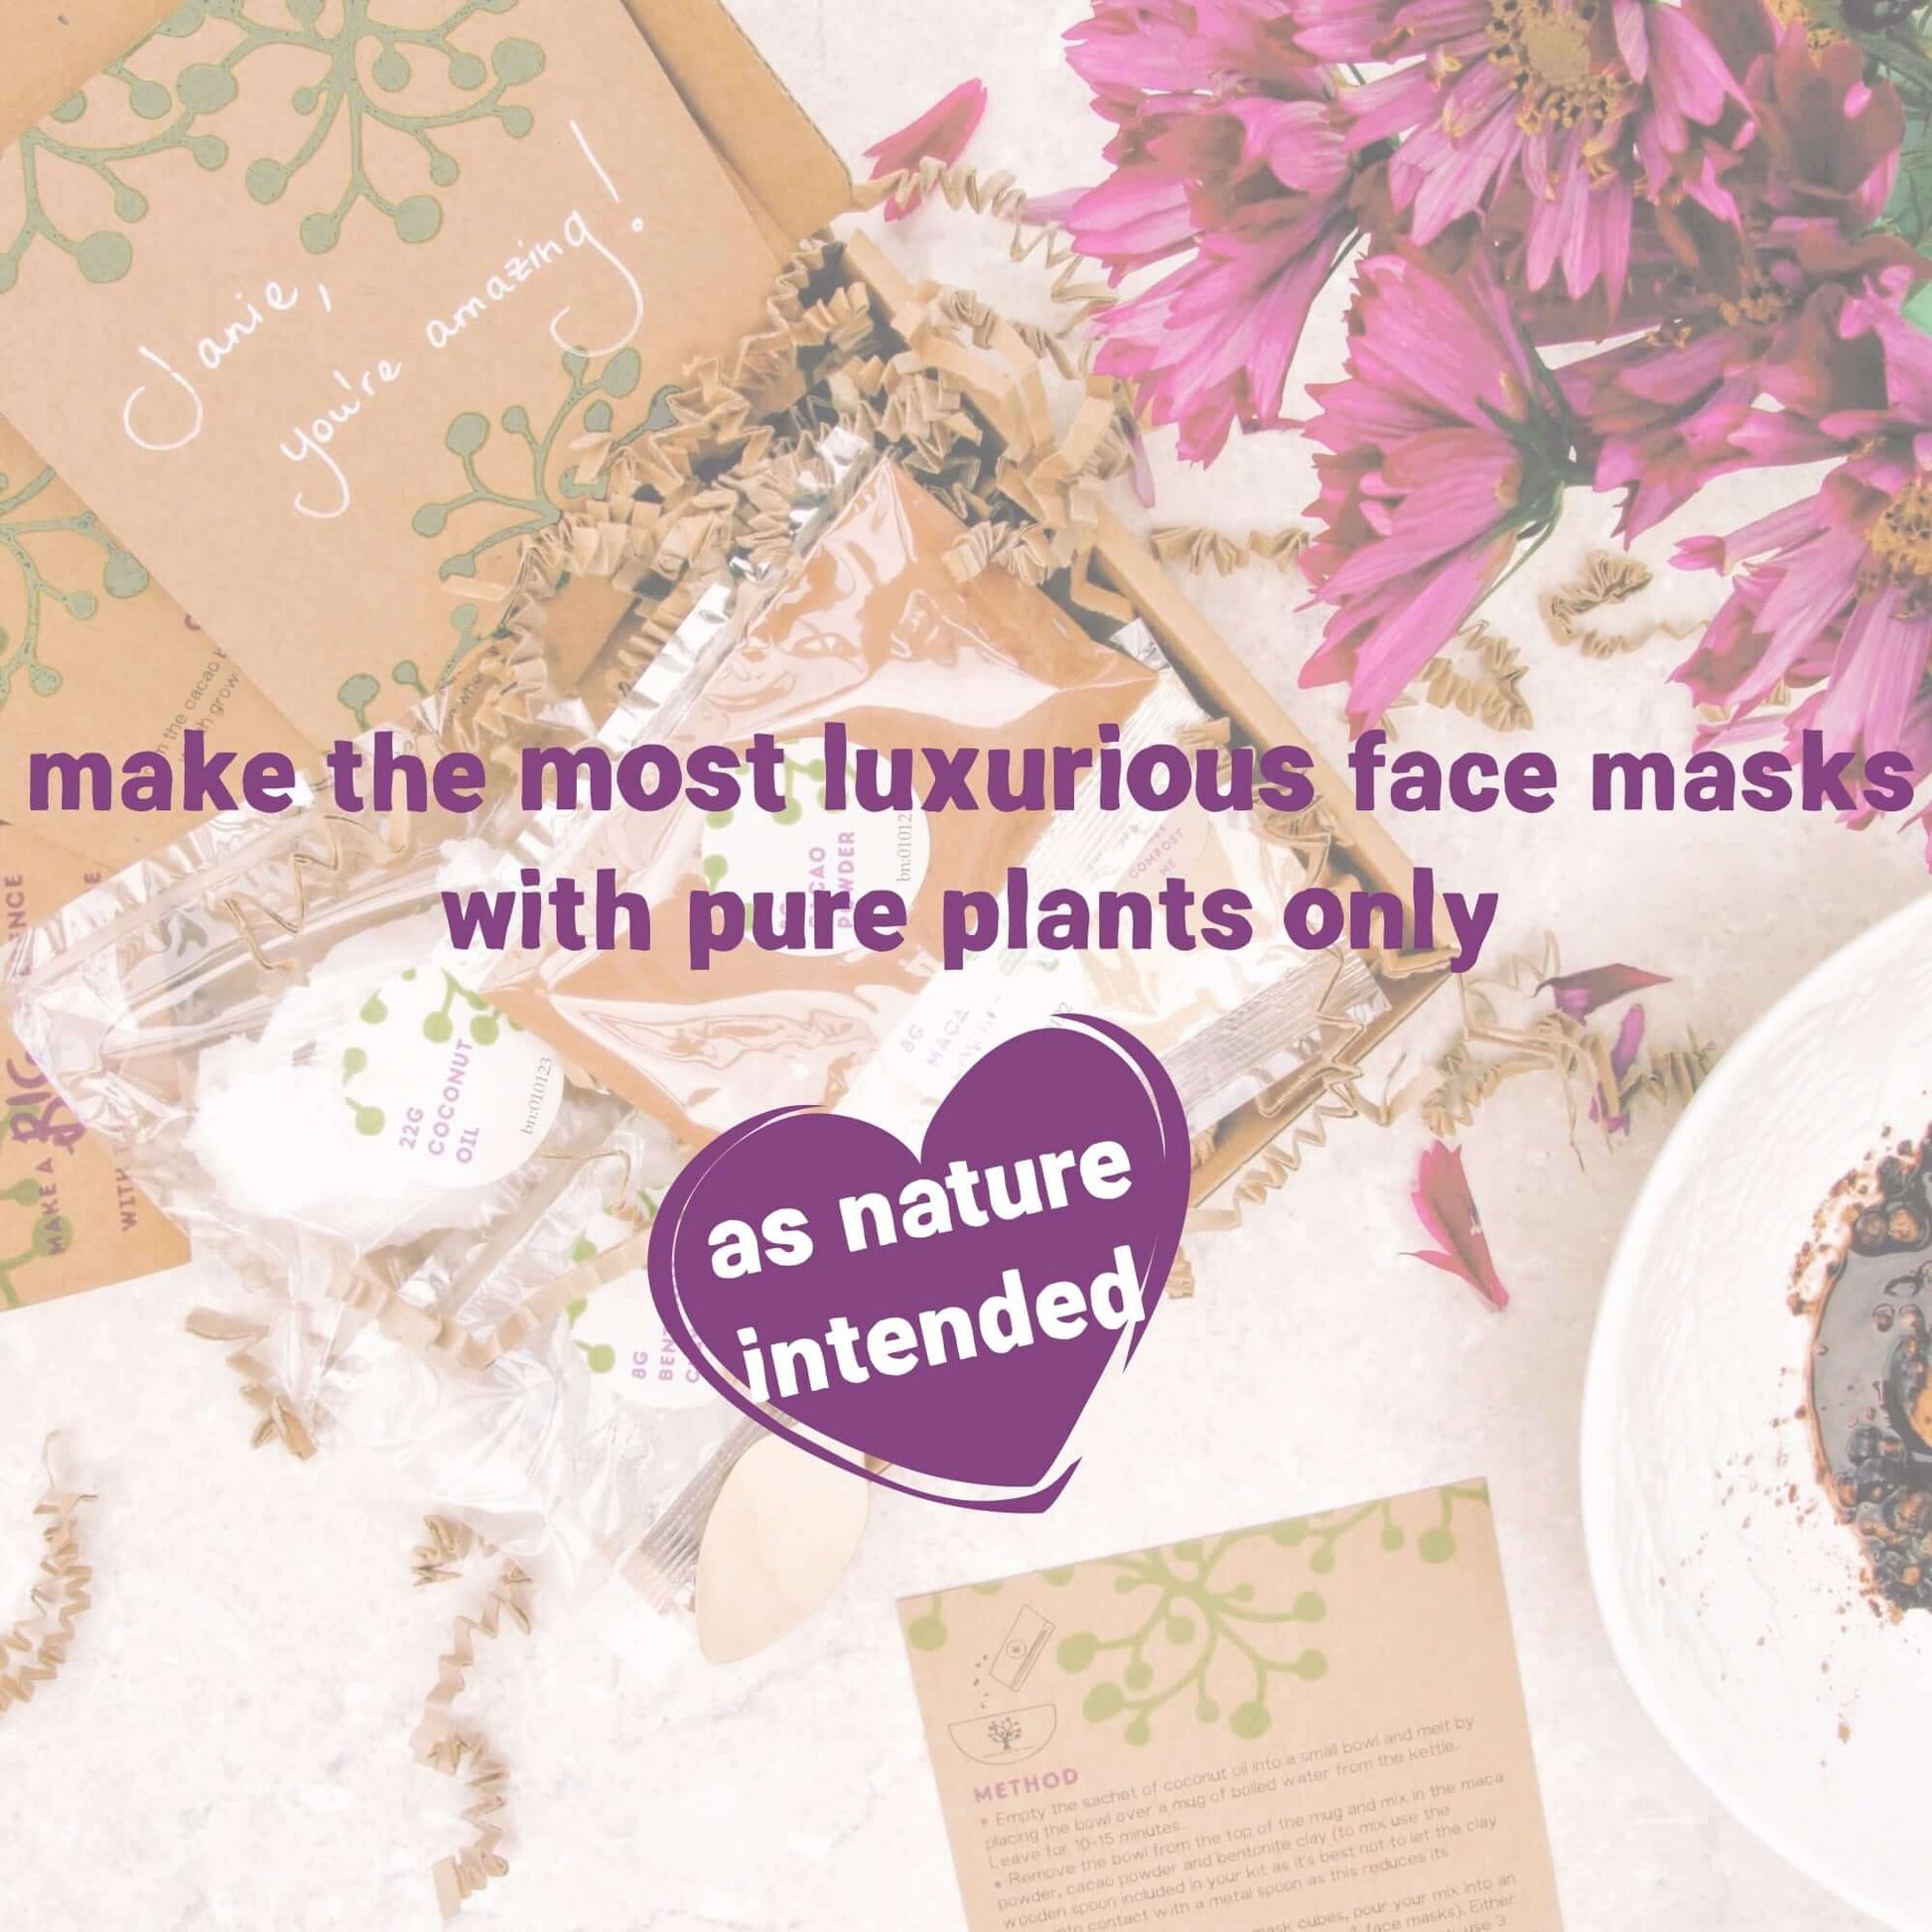 eco-friendly face mask kit inside birthday letterbox gift